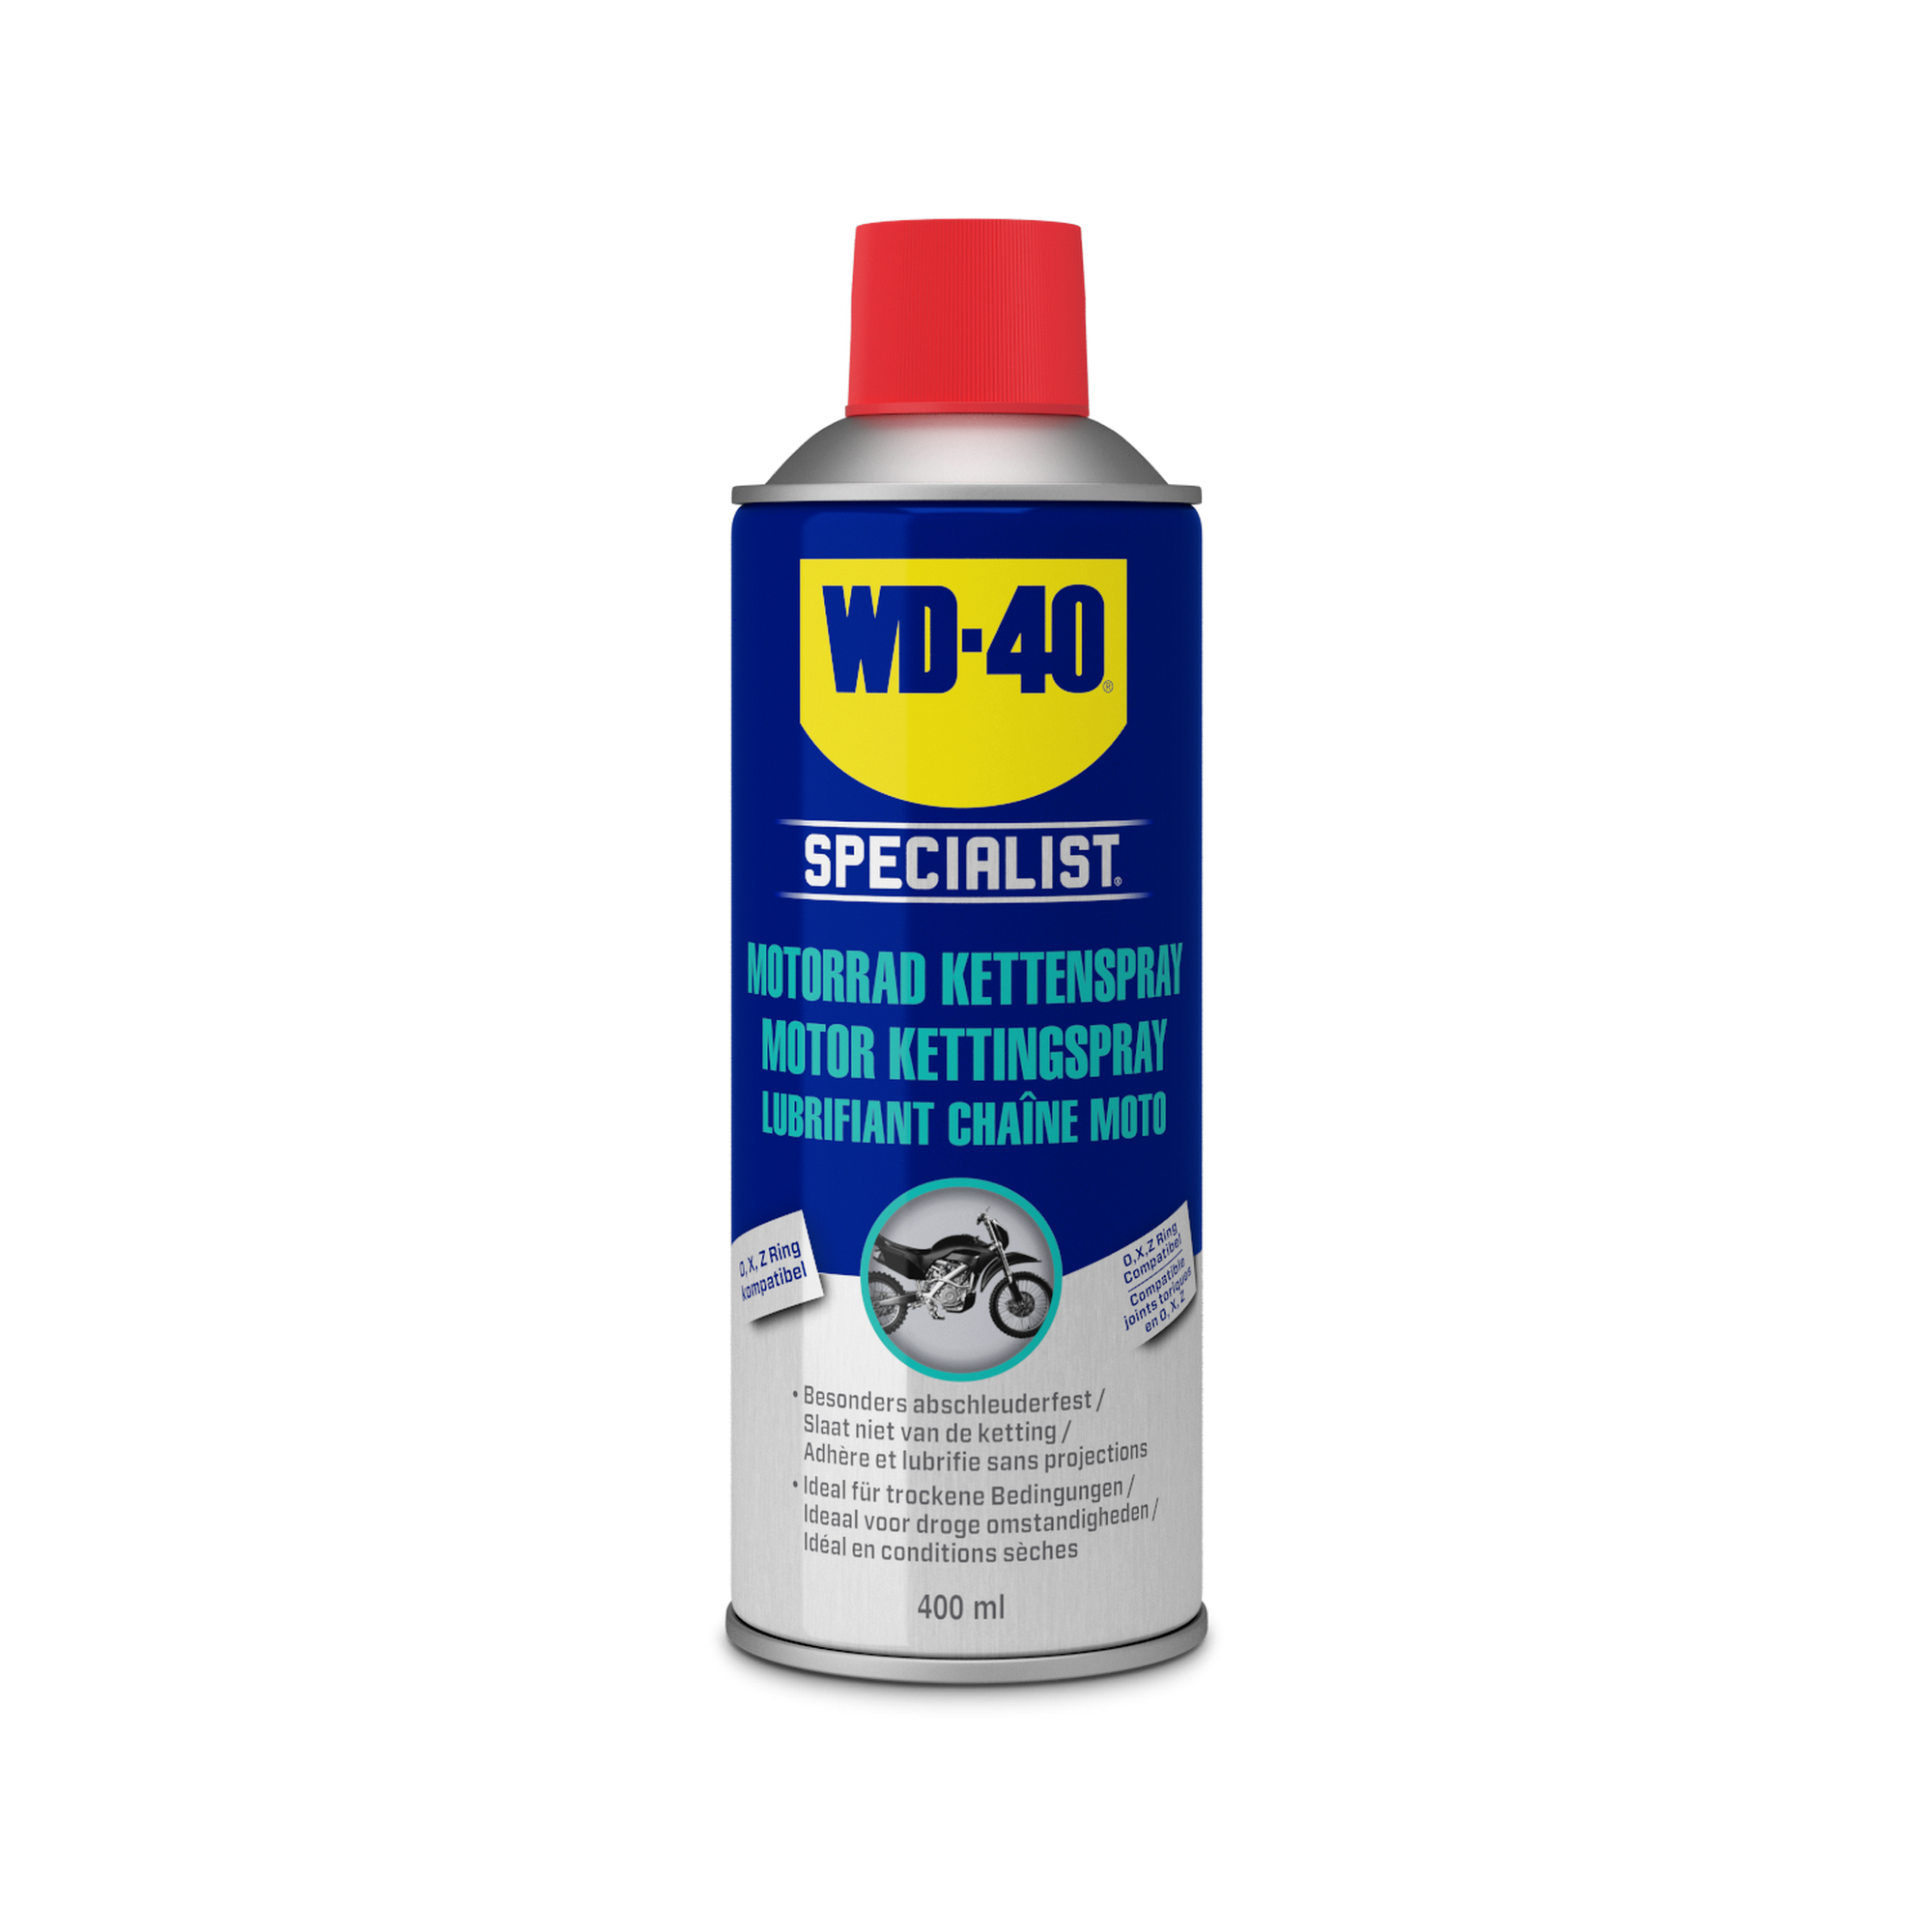 Kettenspray Motorrad 'Specialist' 400 ml + product picture